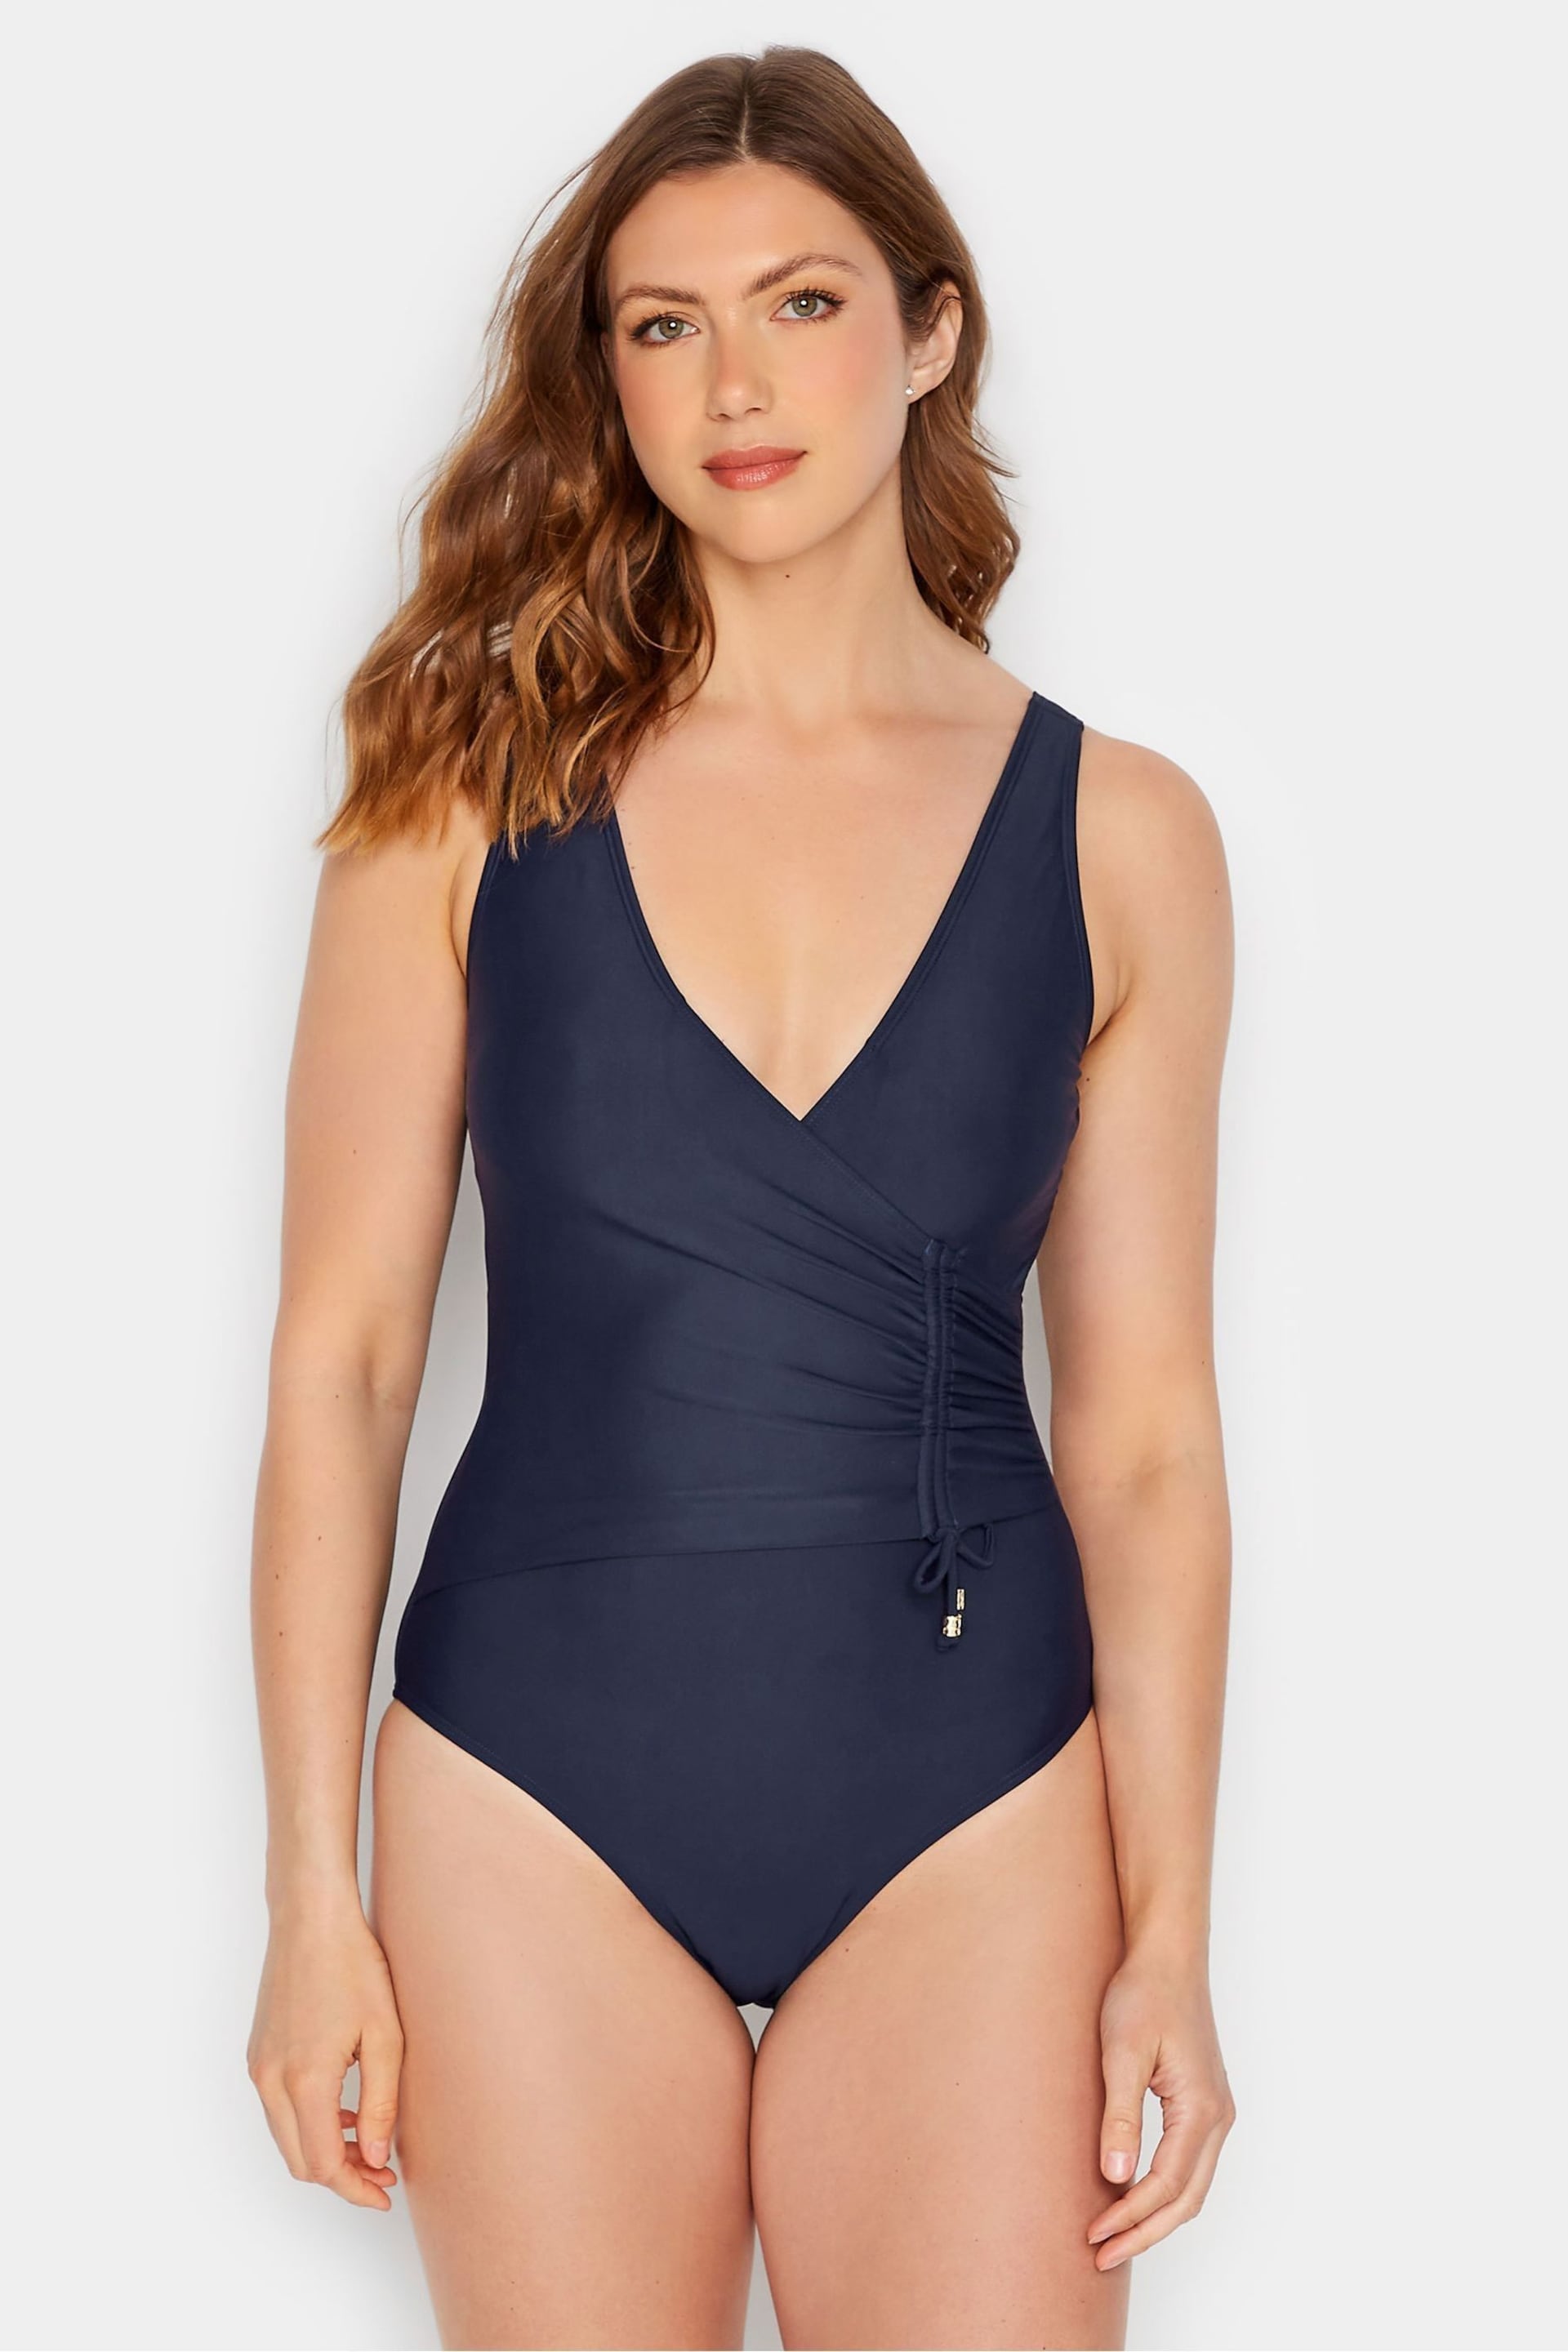 Long Tall Sally Blue Ruched Side Detail Swimsuit - Image 1 of 5